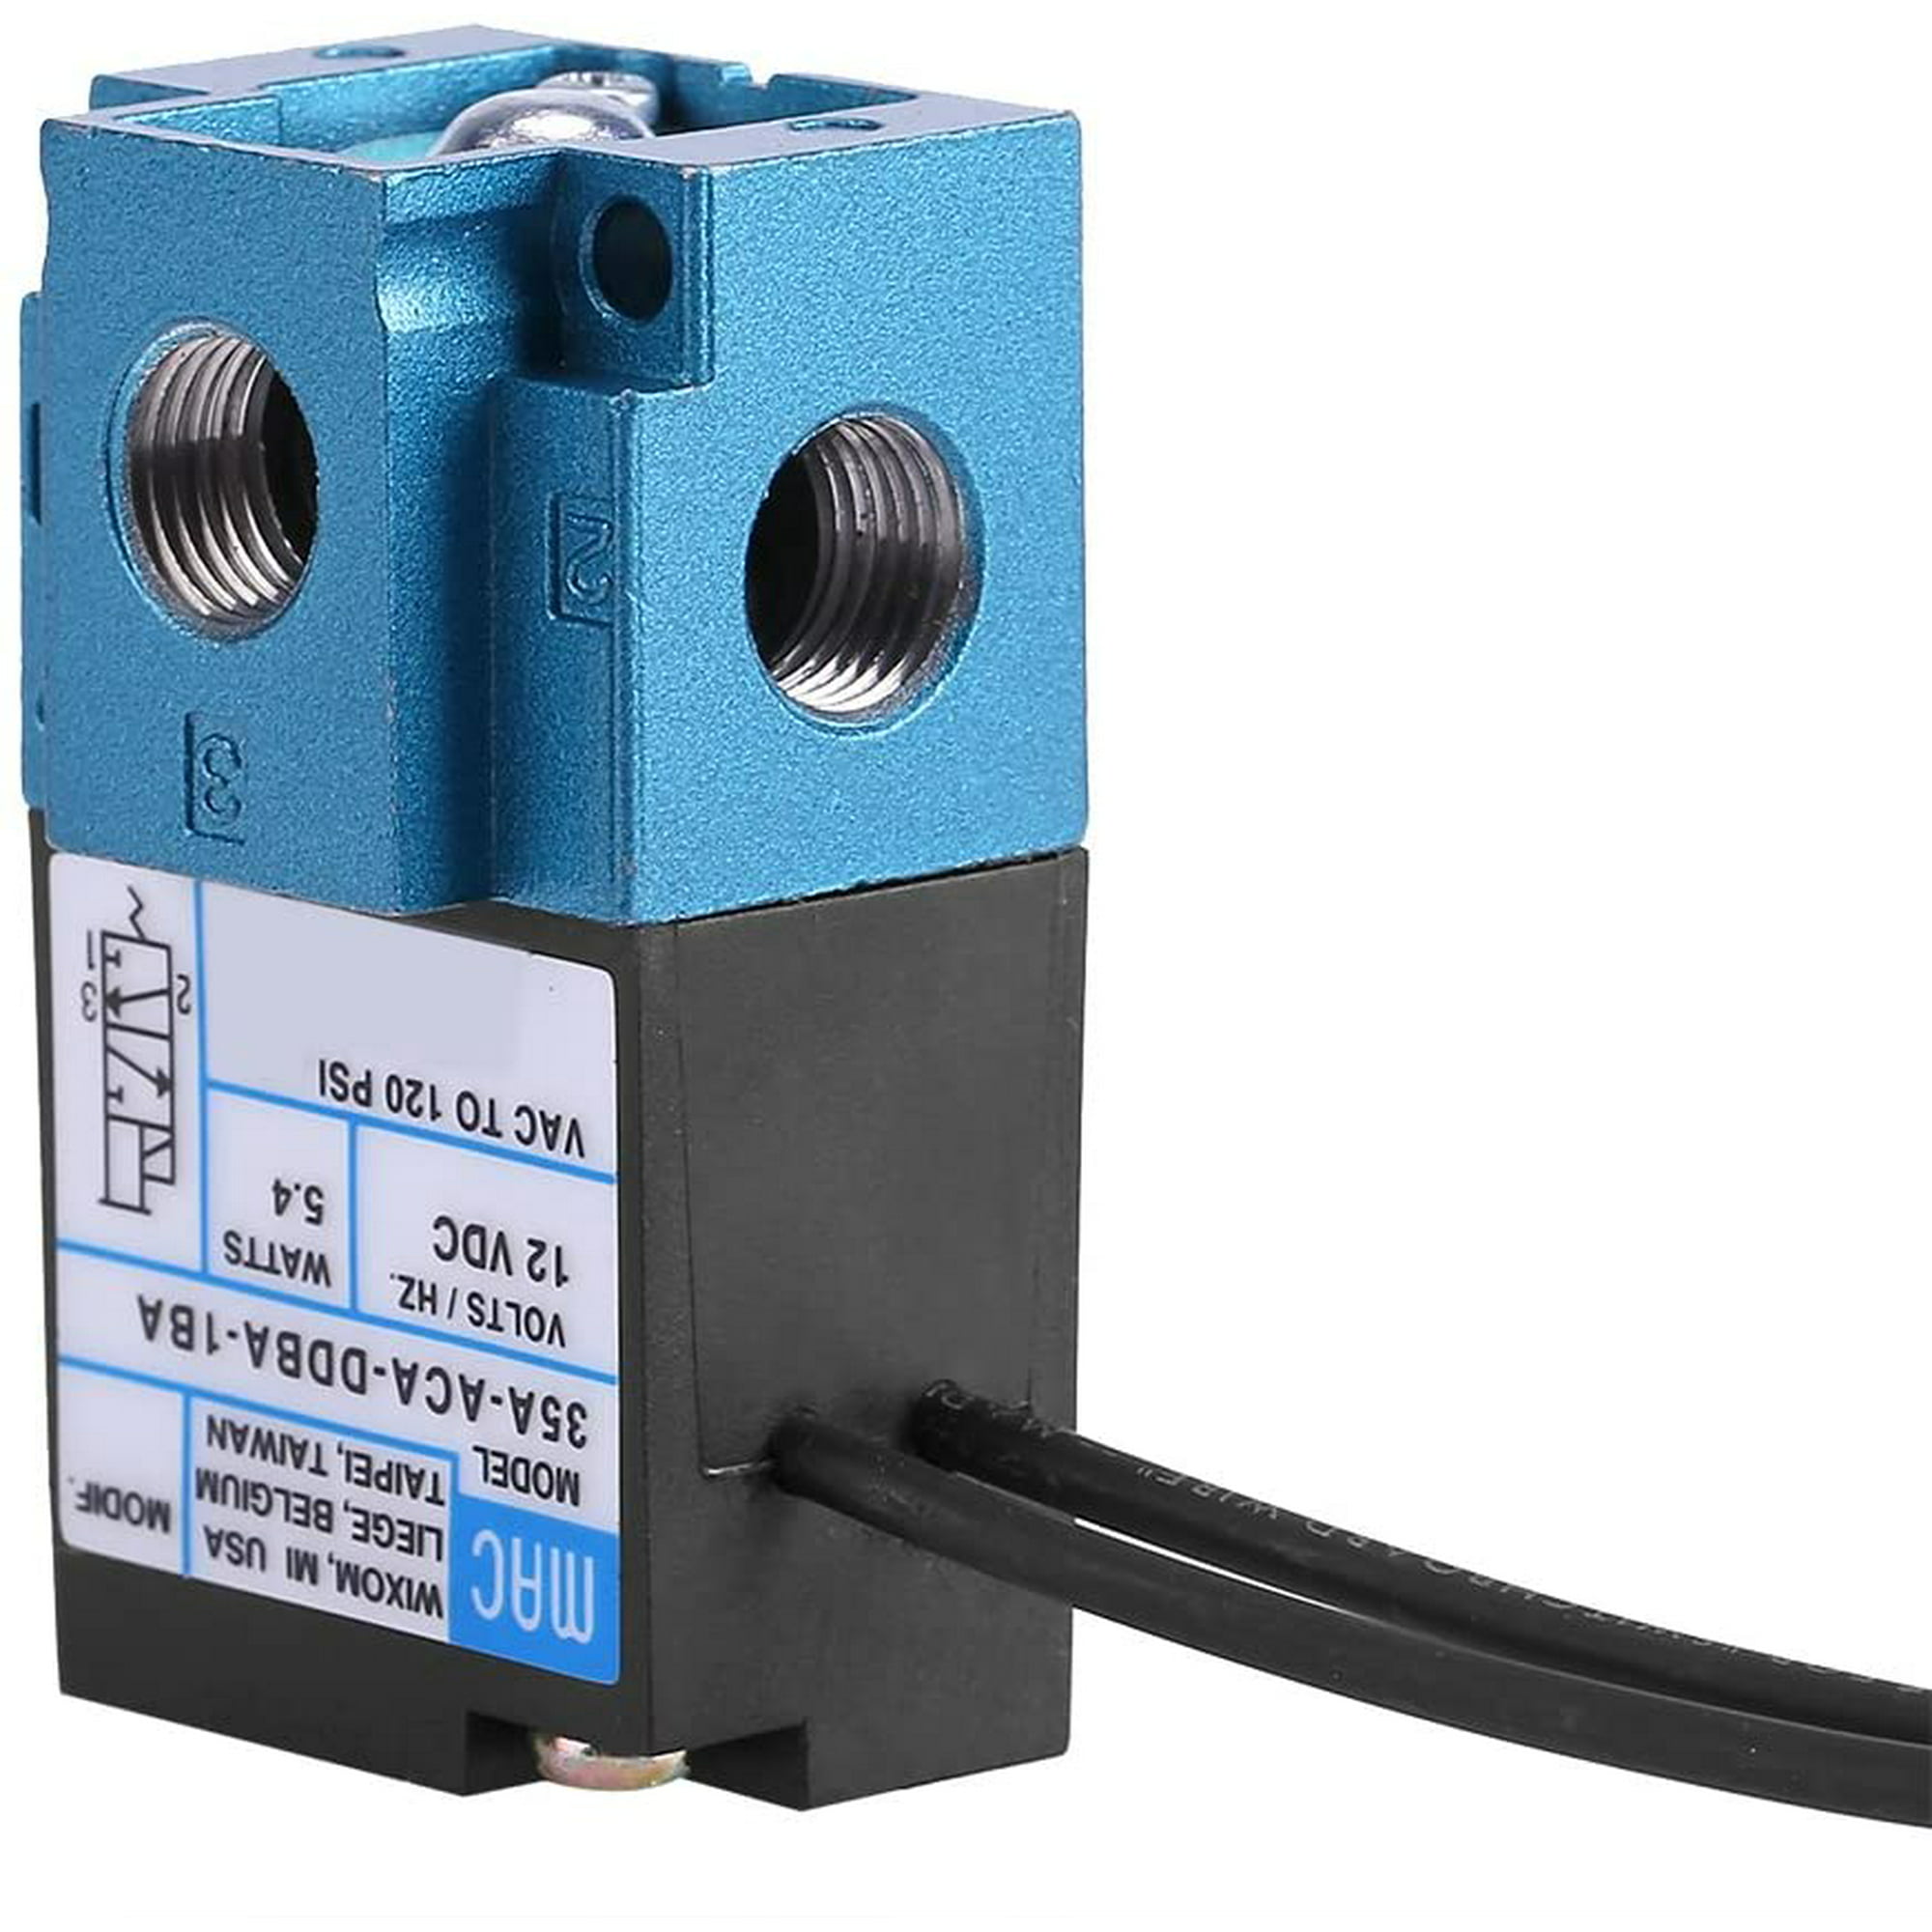 DC12V Cast Steel Solenoid Valve High Frequency Solenoid Valve with Black Wires Electronic Boost Control Solenoid Valve